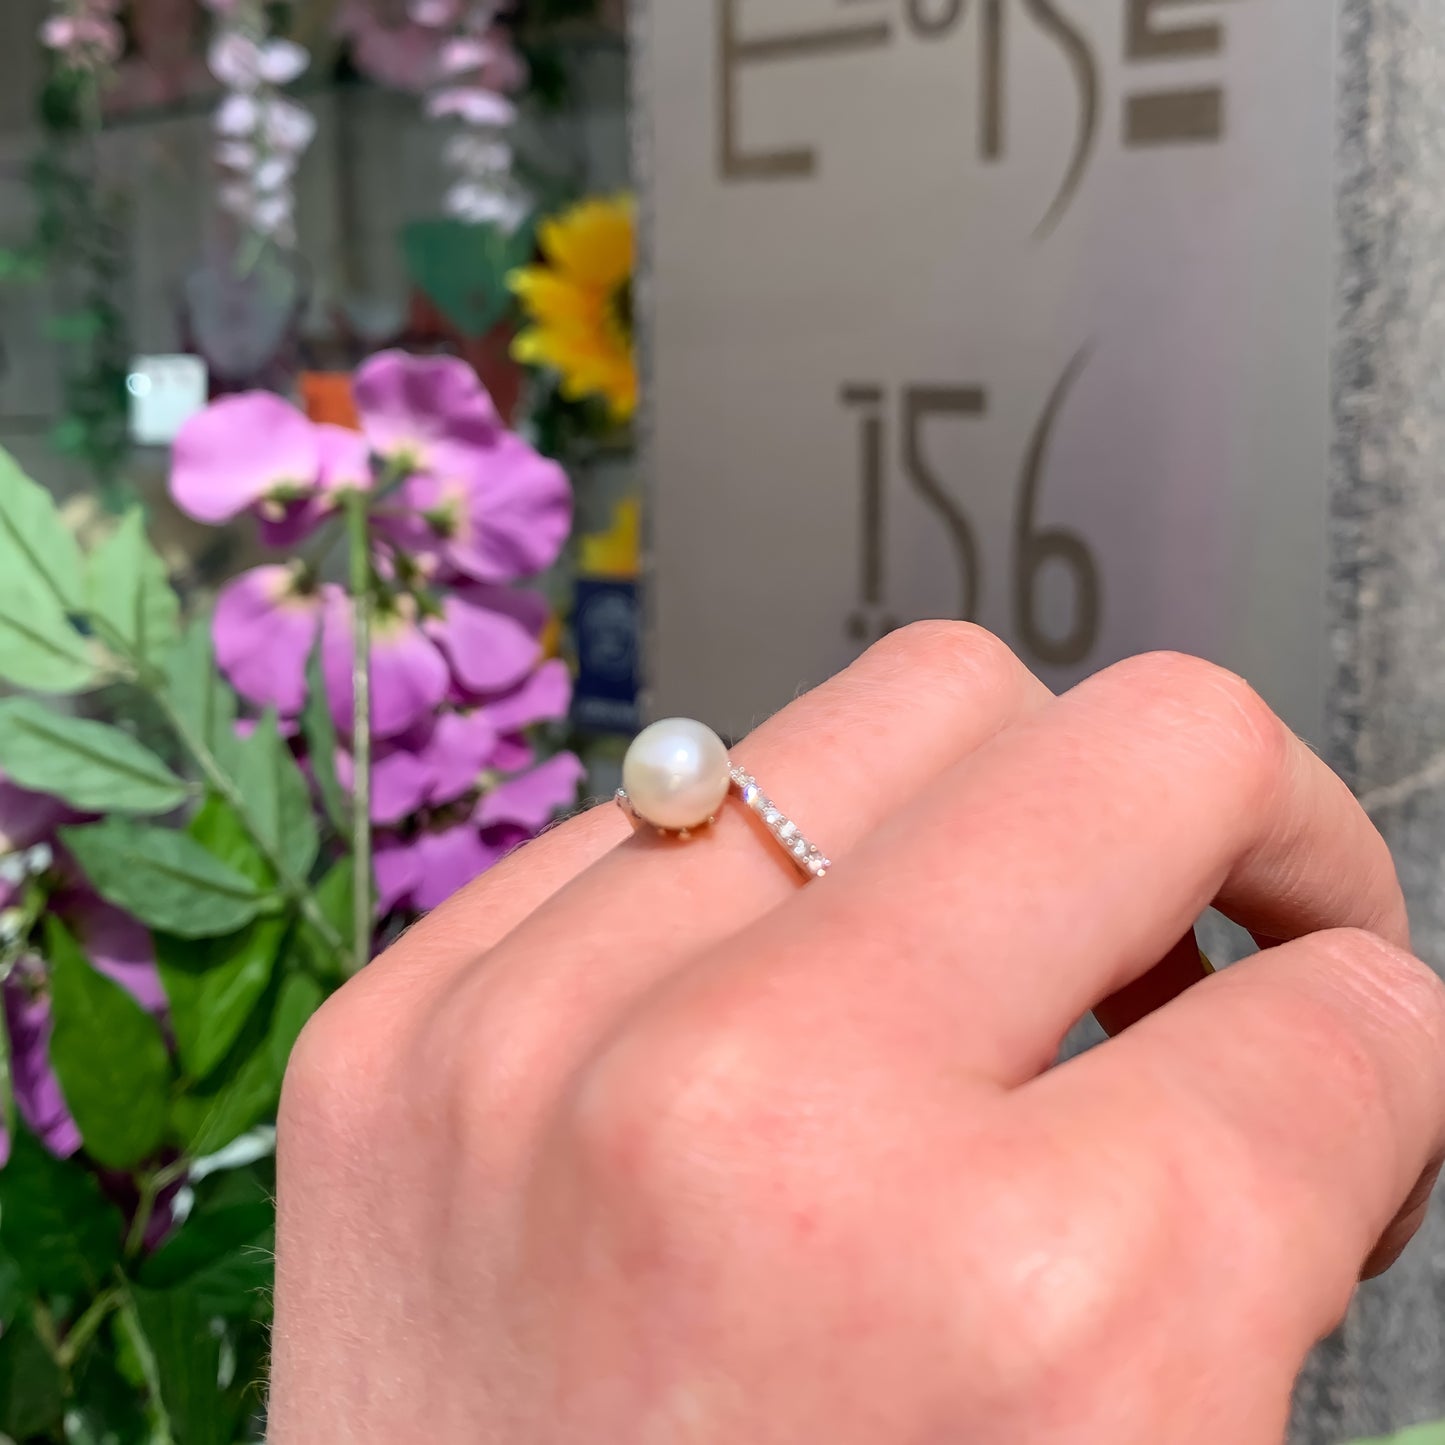 9ct Yellow Gold Pearl and Diamond Ring - SIZE L